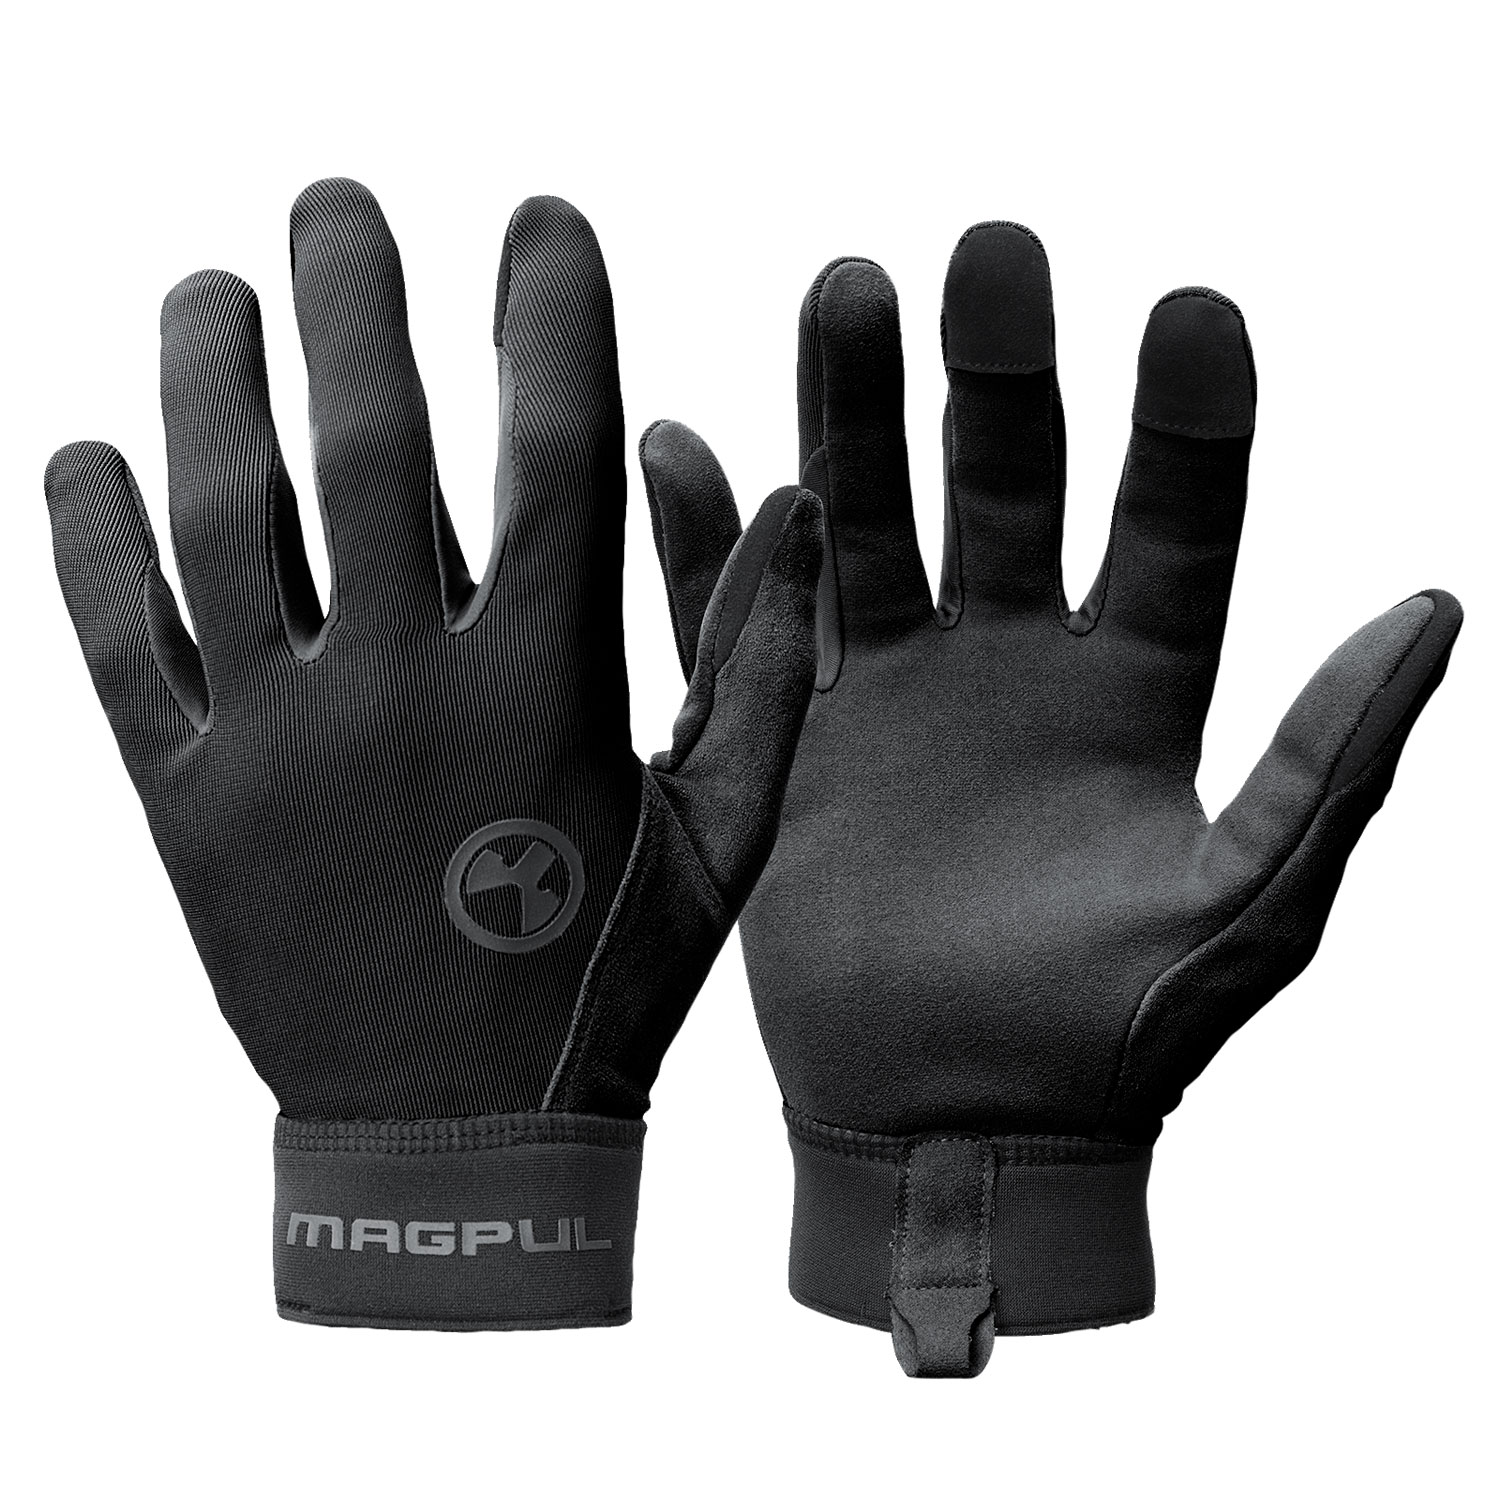 Magpul MAG1014-001 Technical 2.0 Gloves Black Touchscreen Synthetic/Suede XL